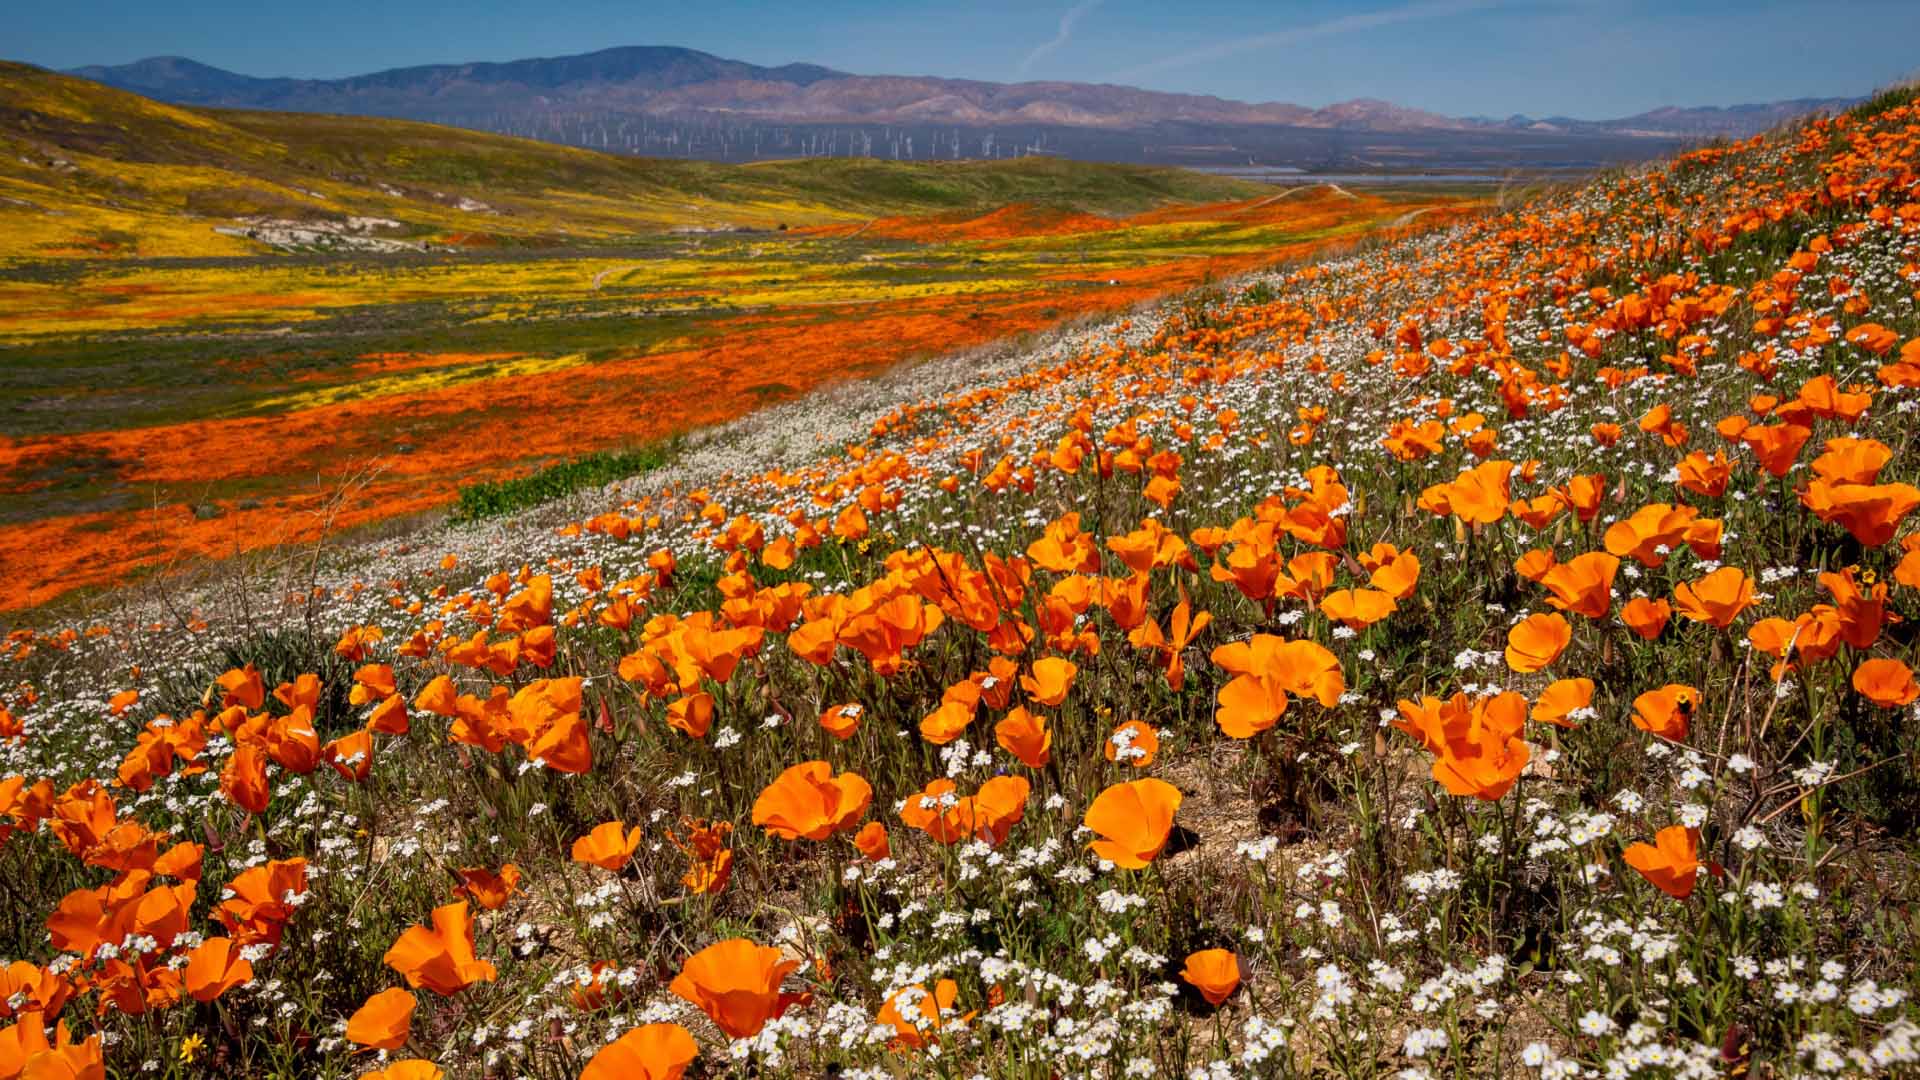 Superbloom in Antelope Valley California Poppy Reserve State Natural Reserve